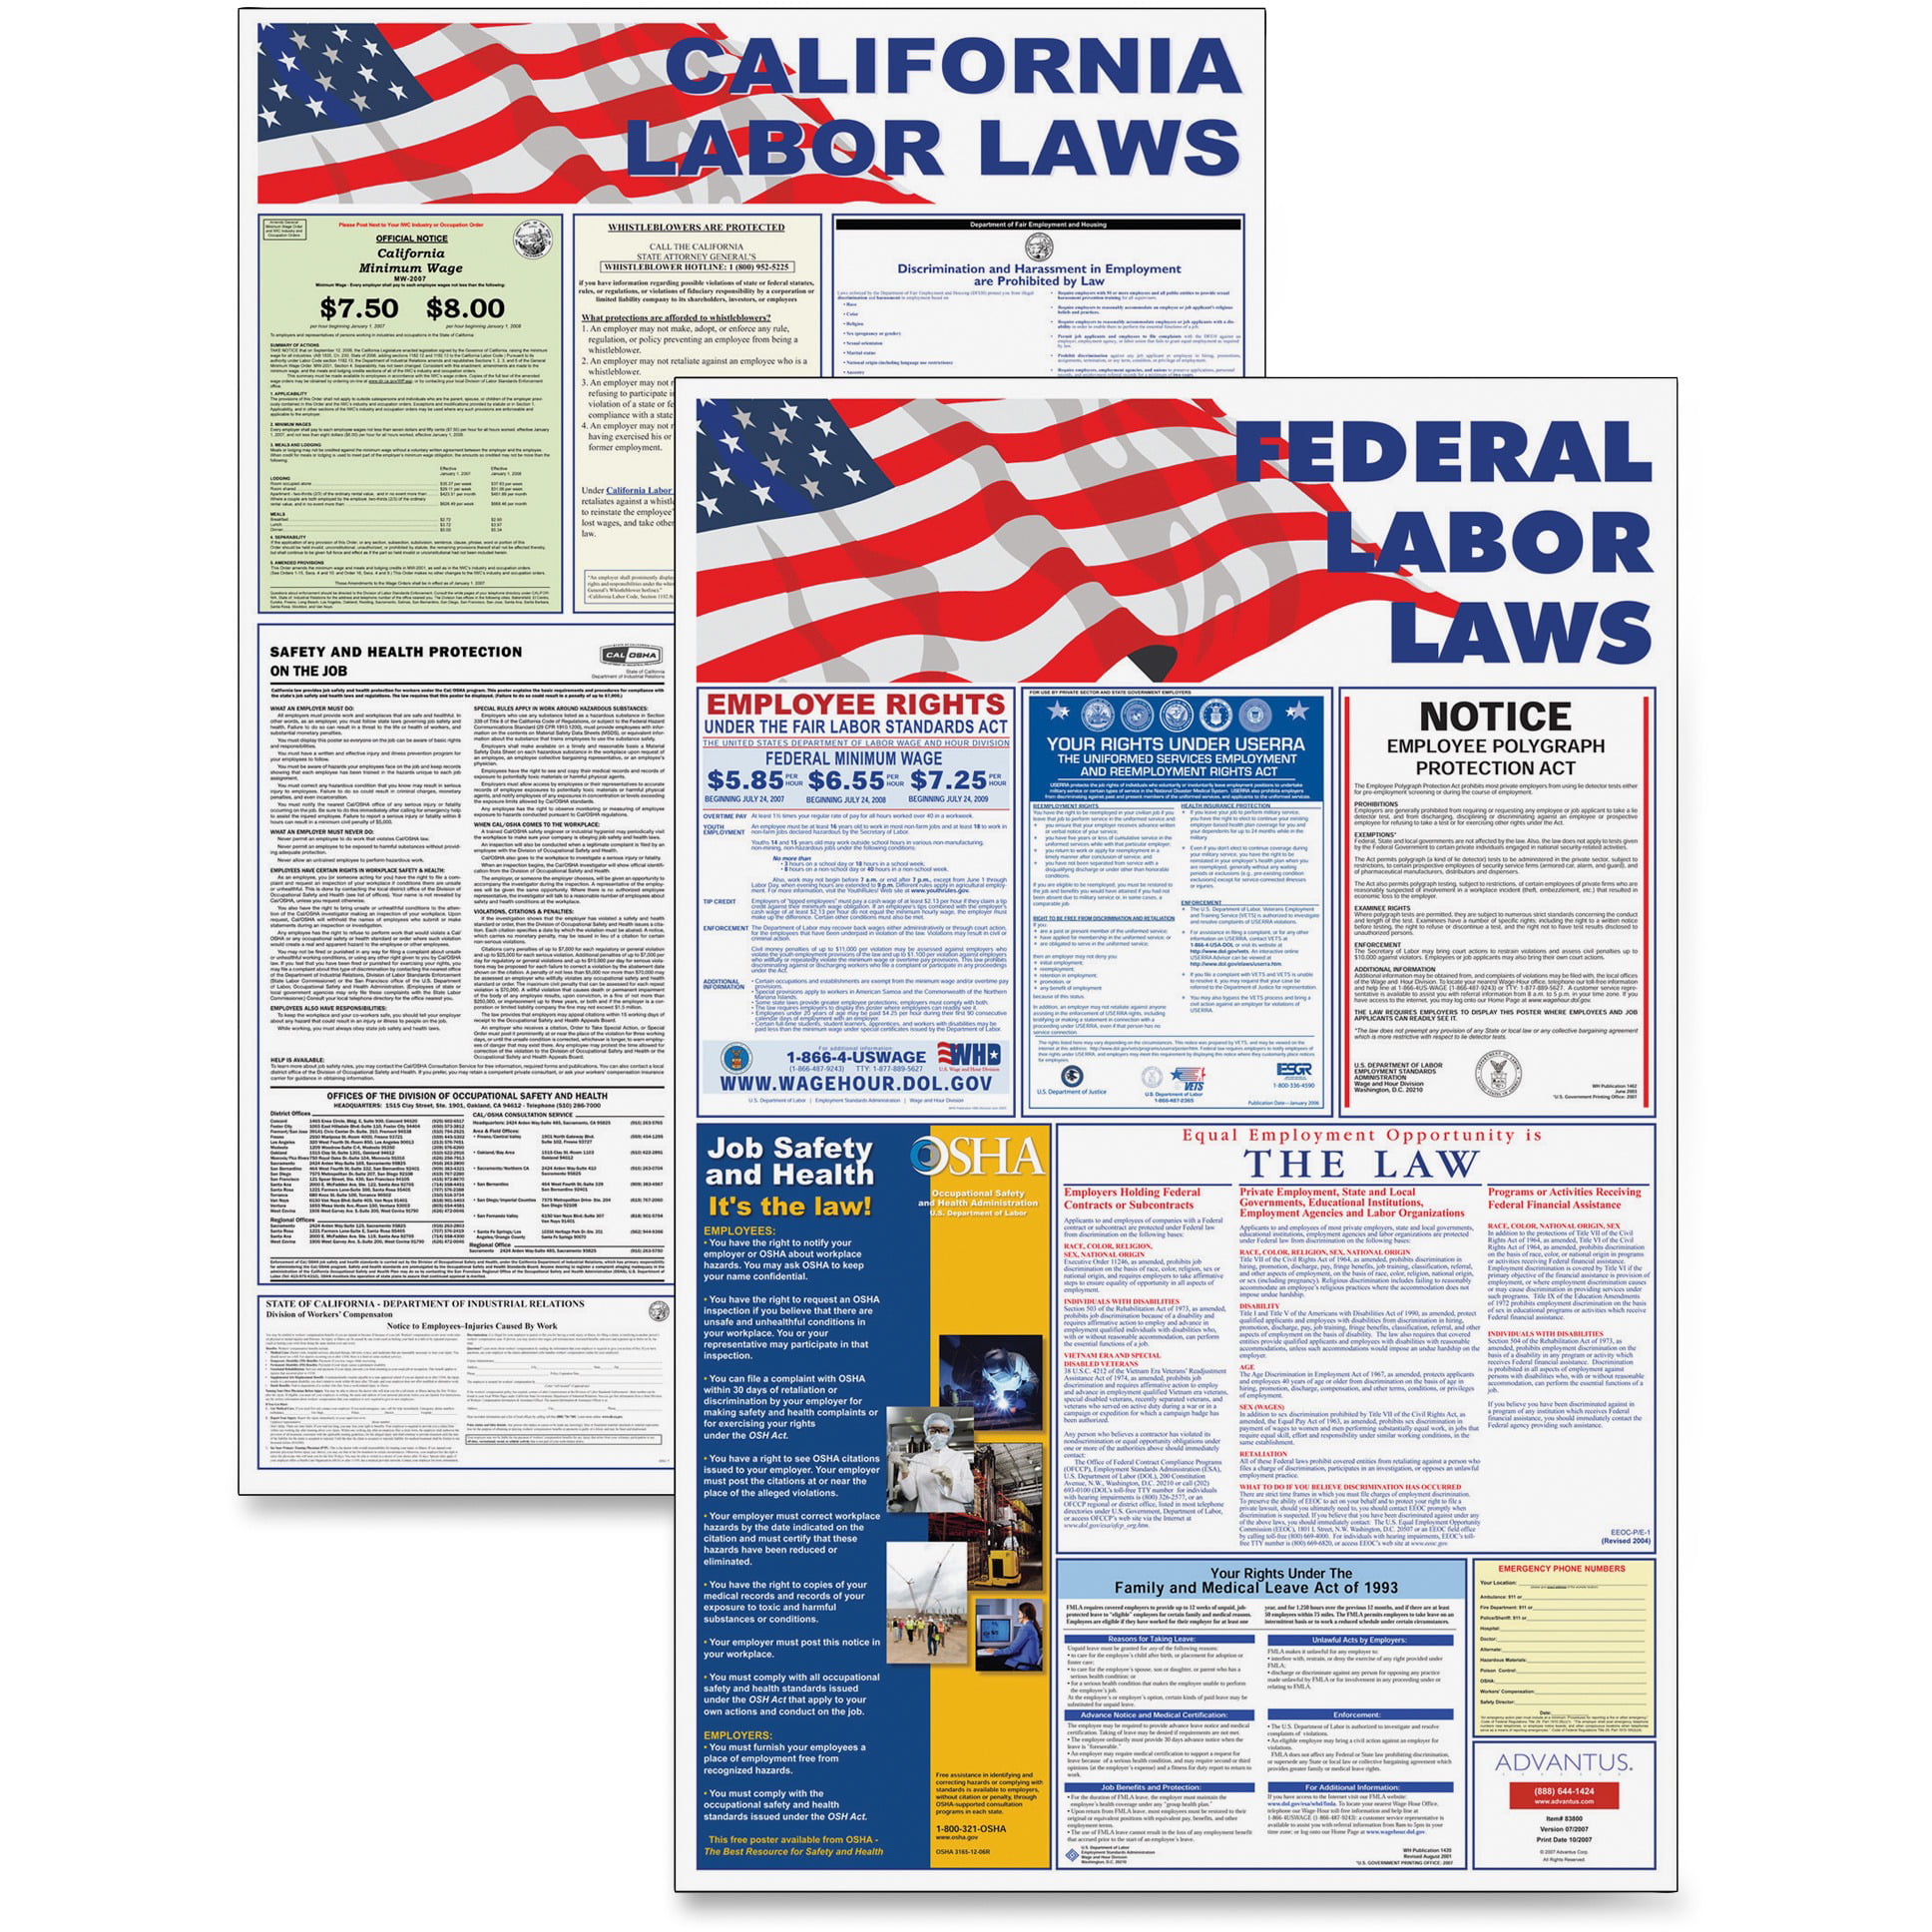 advantus-avt83905-federal-and-state-labor-law-posters-1-each-assorted-walmart